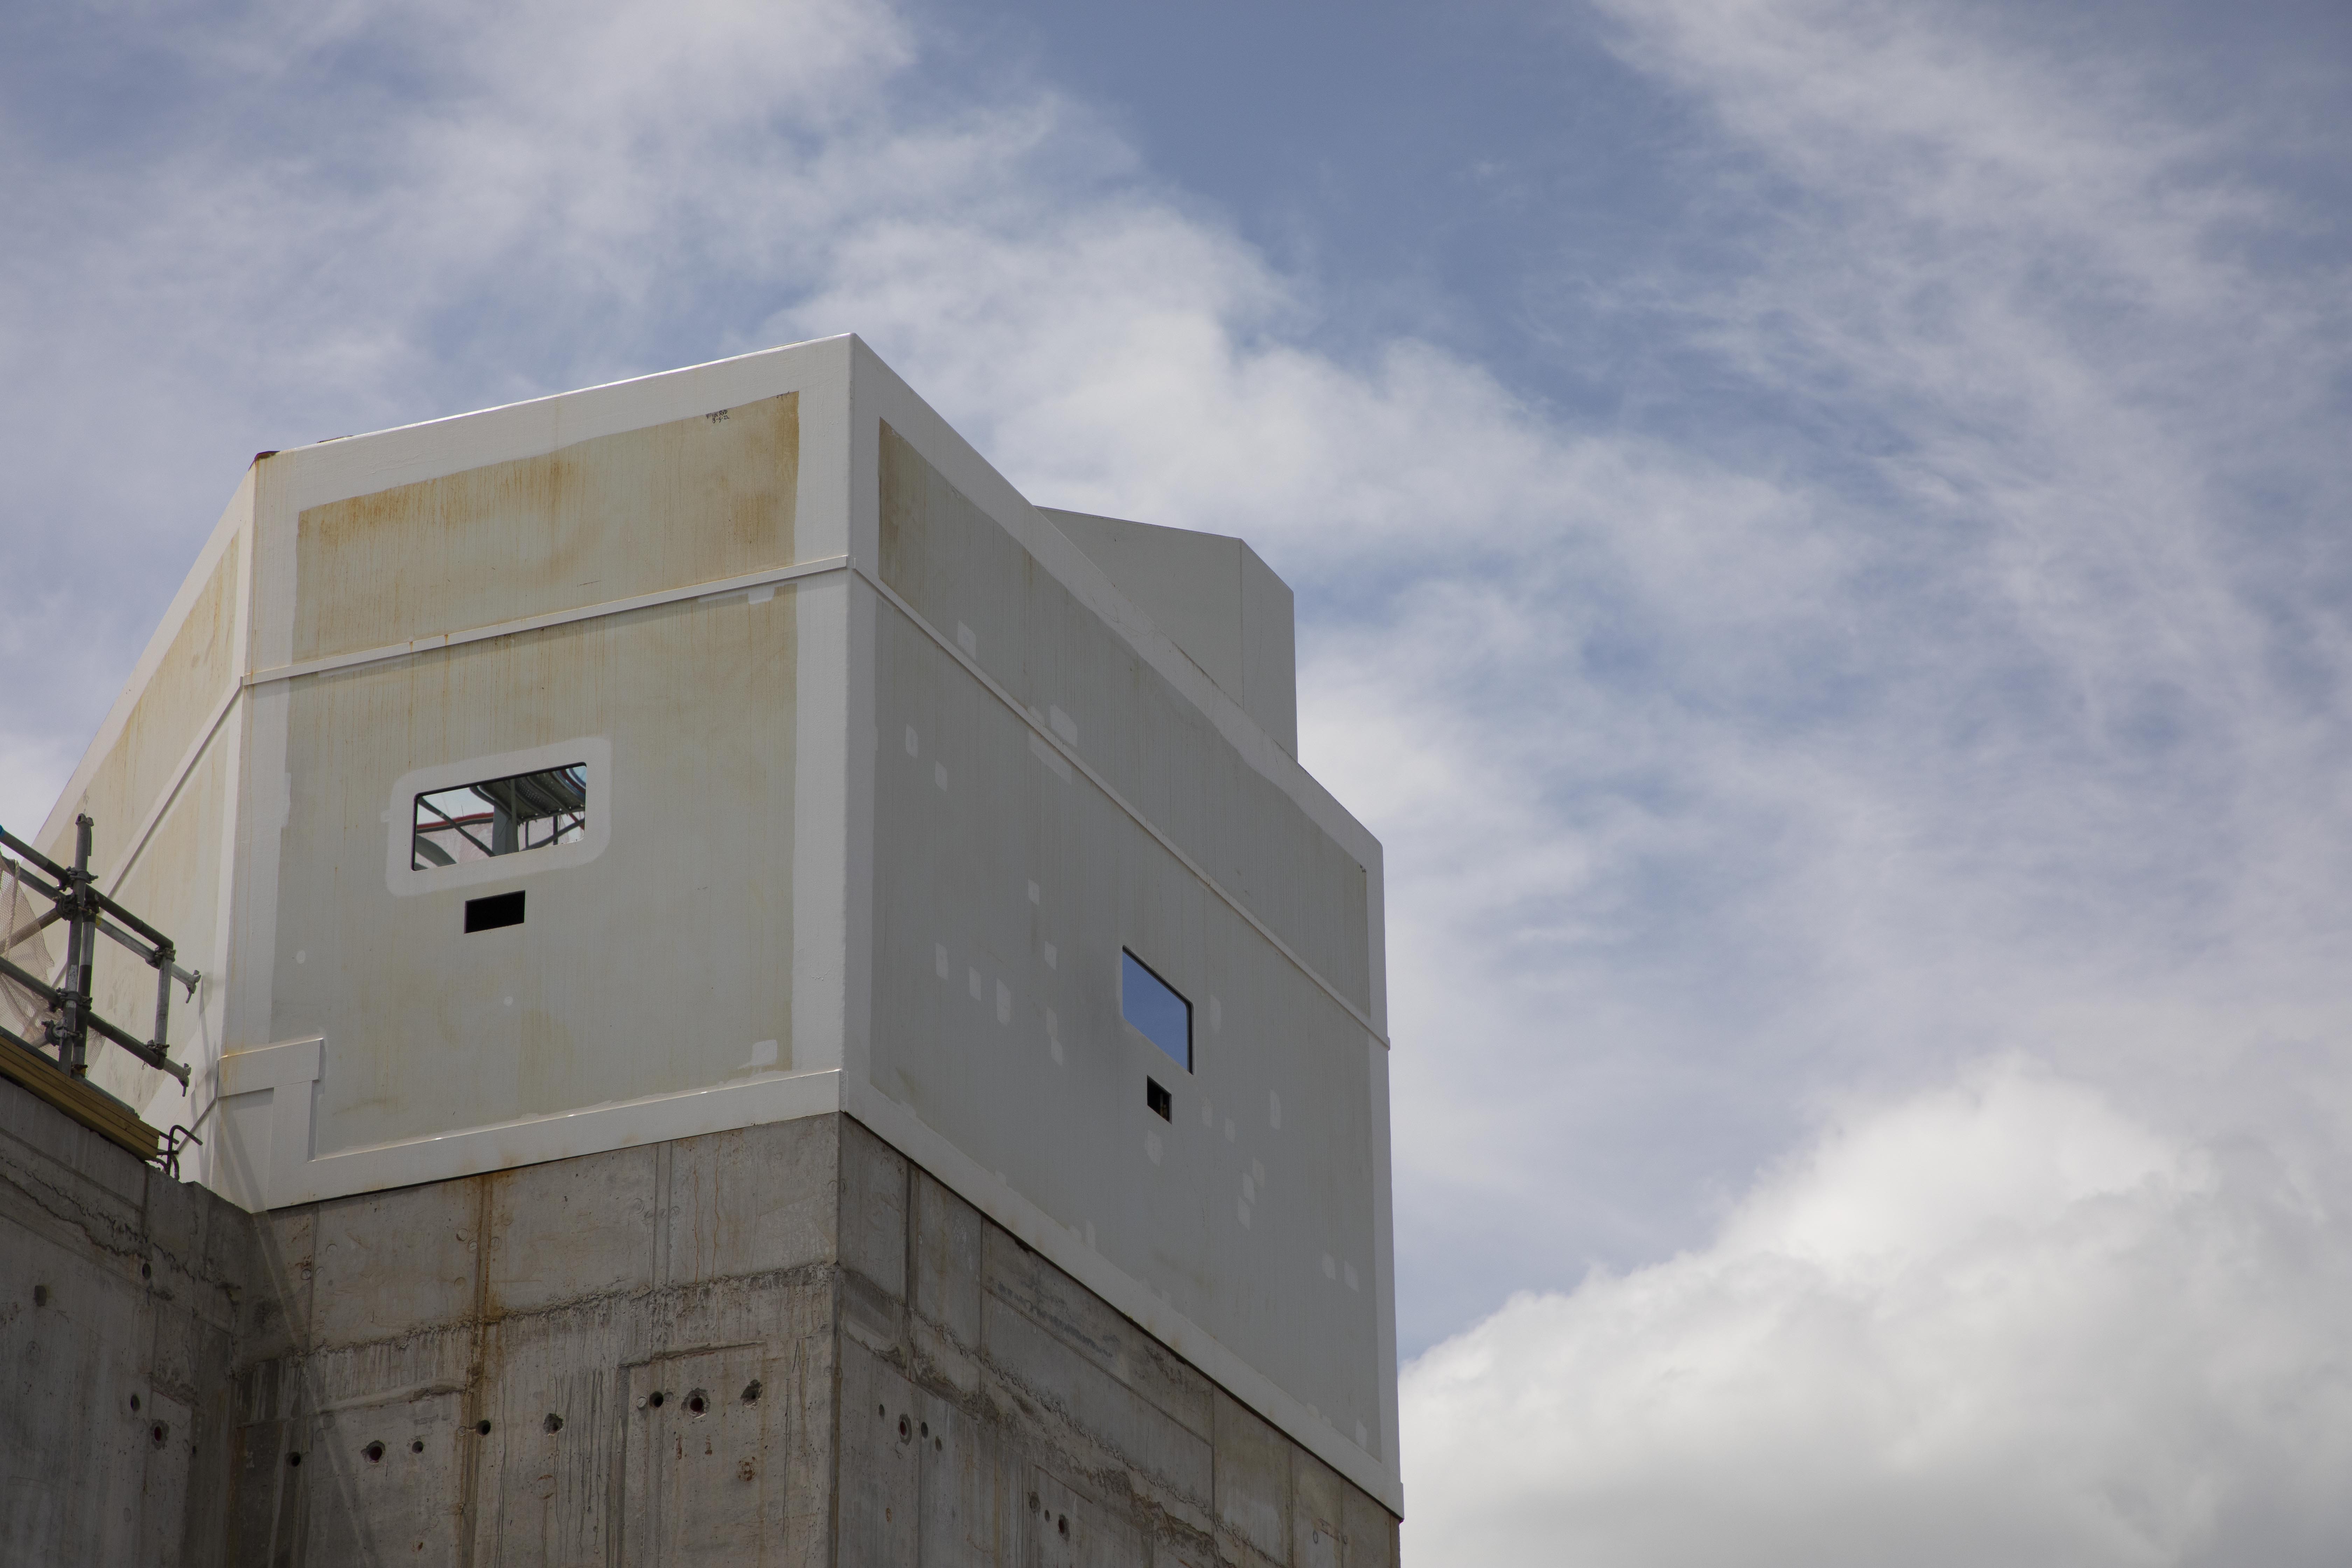 The first of four Main Process Building security personnel enclosures 